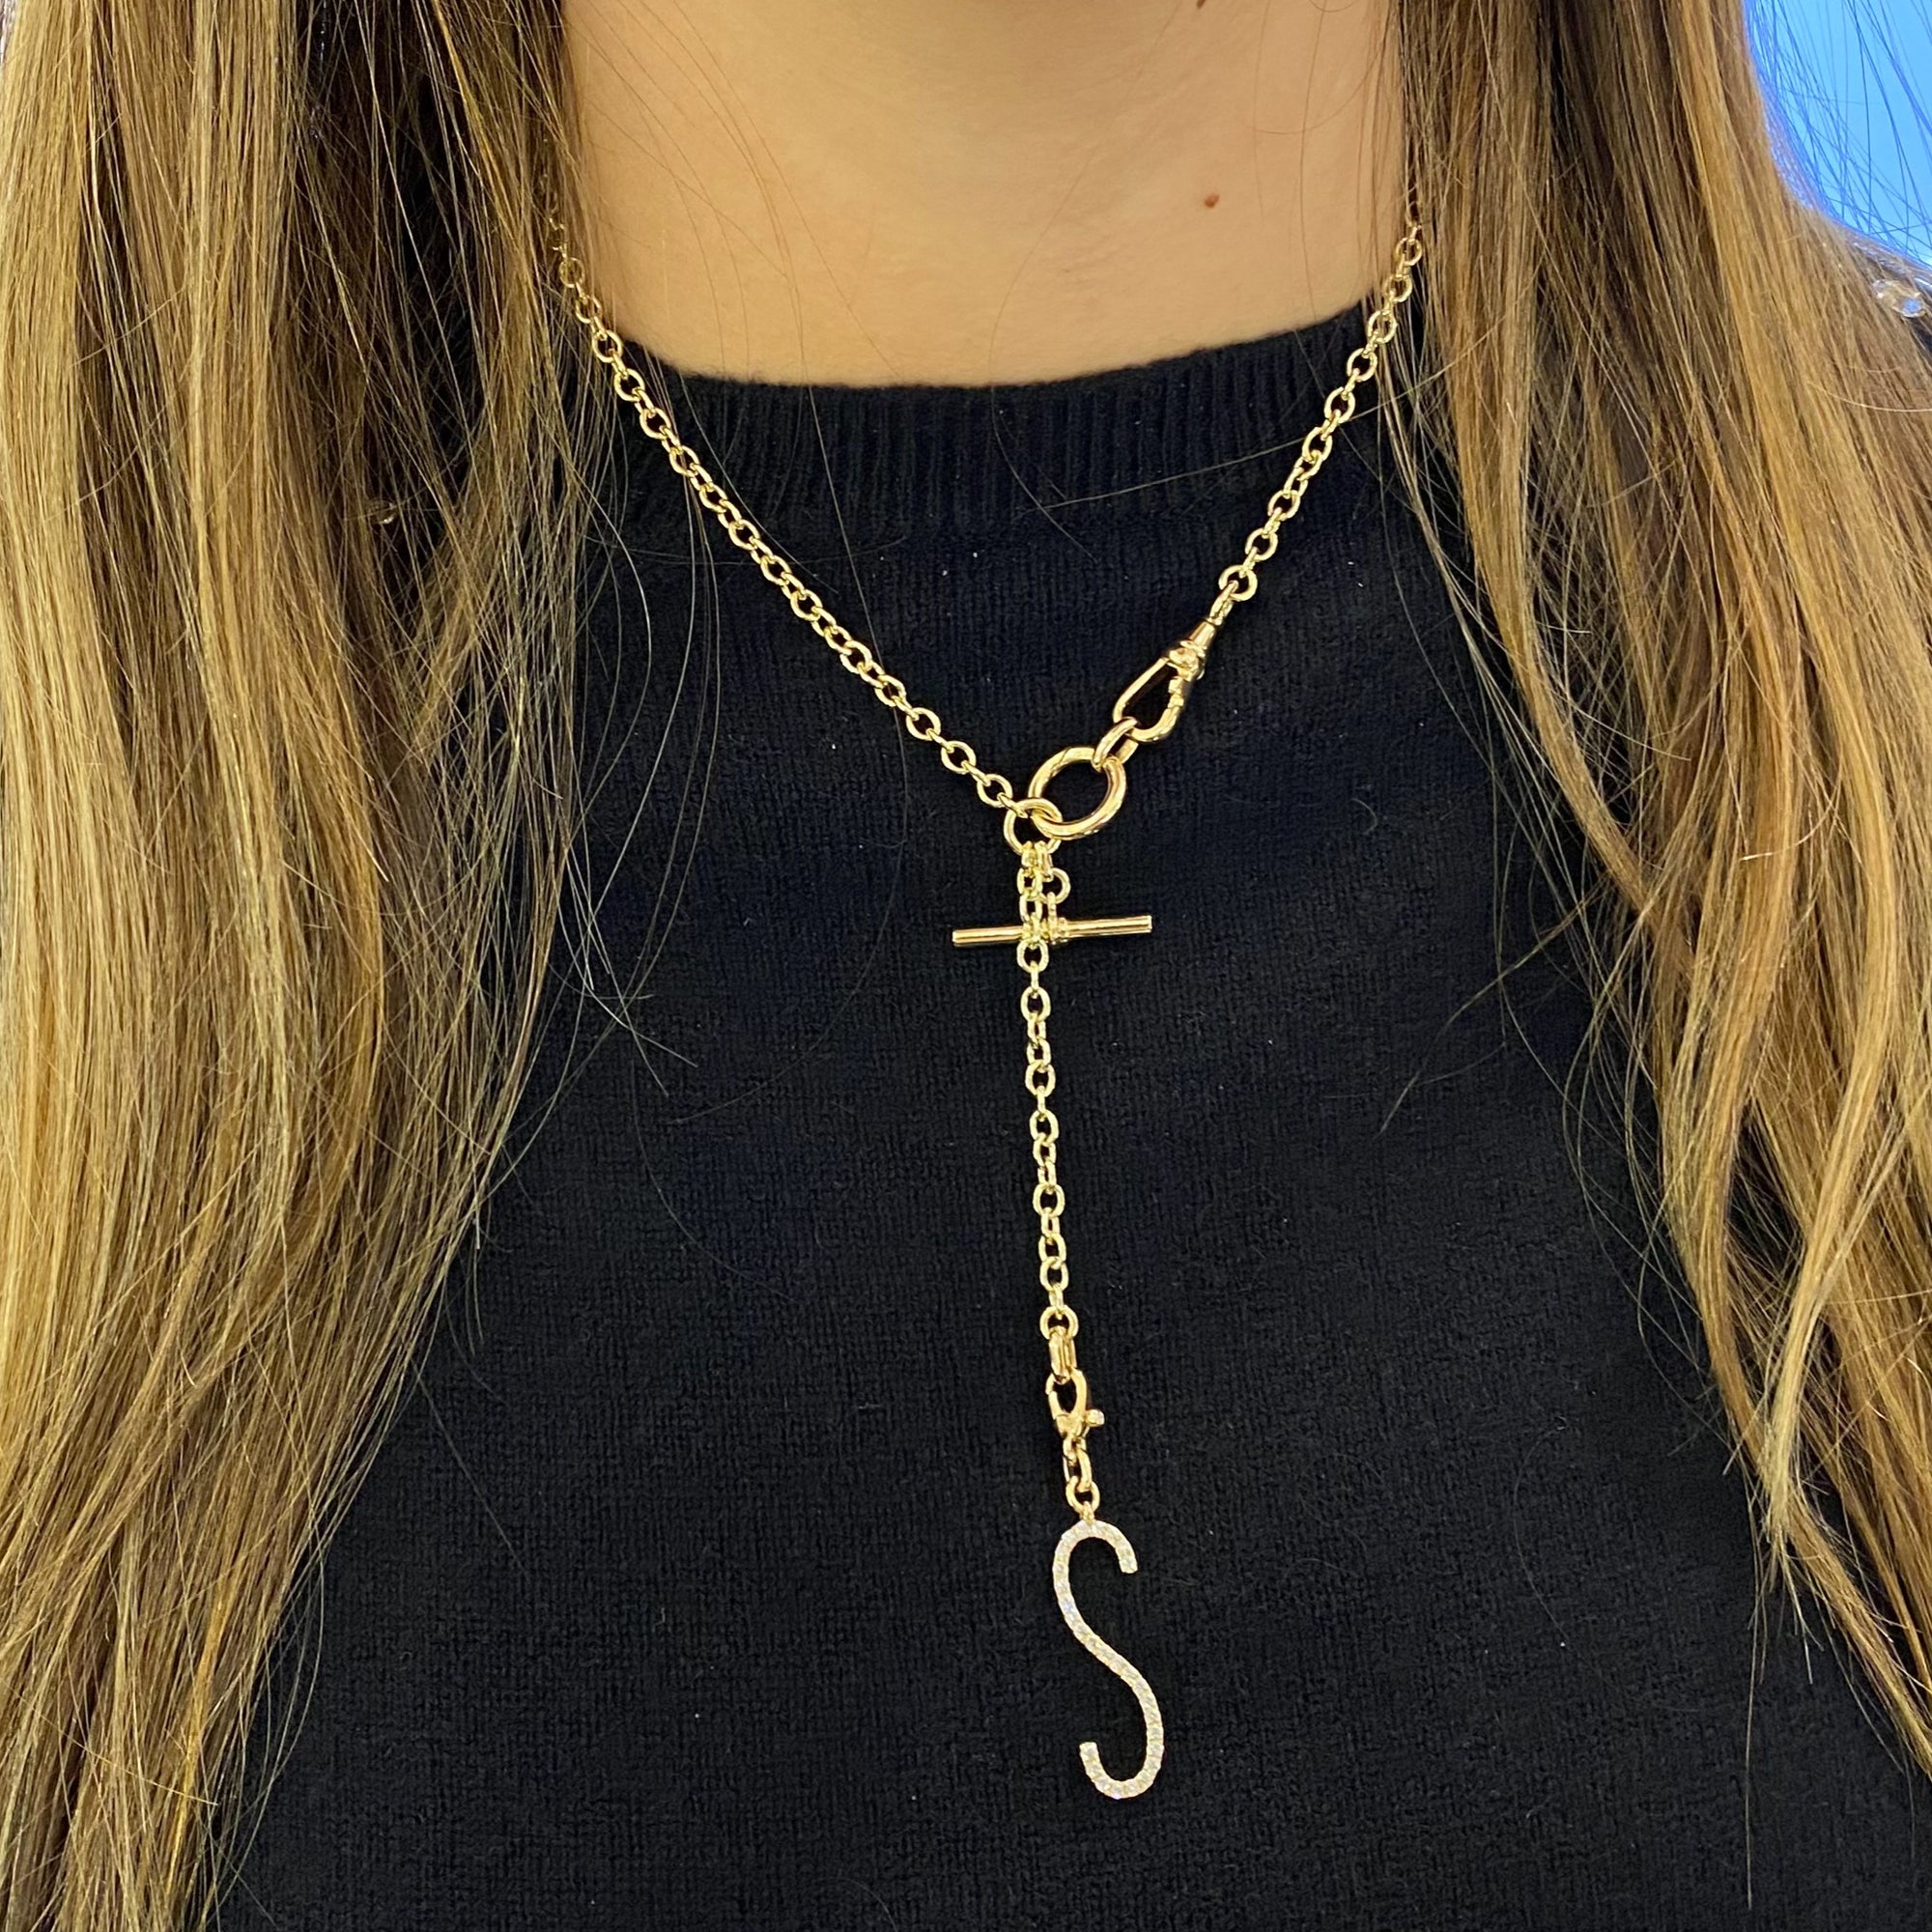 Gold Toggle Lariat Necklace  - 14K gold weighing 21.2 grams